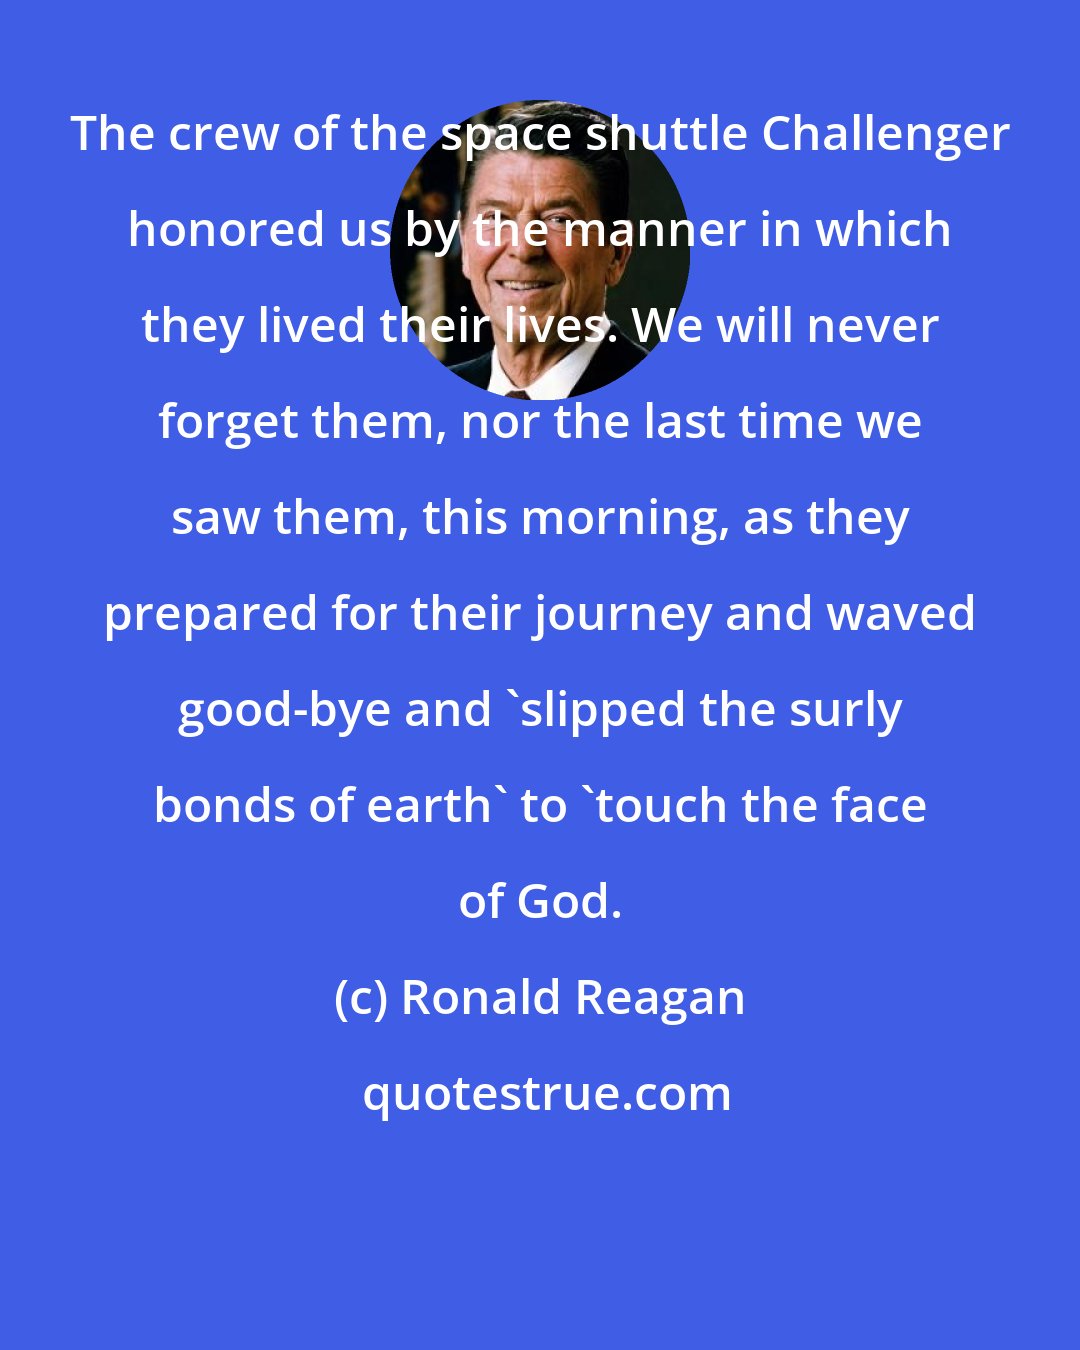 Ronald Reagan: The crew of the space shuttle Challenger honored us by the manner in which they lived their lives. We will never forget them, nor the last time we saw them, this morning, as they prepared for their journey and waved good-bye and 'slipped the surly bonds of earth' to 'touch the face of God.